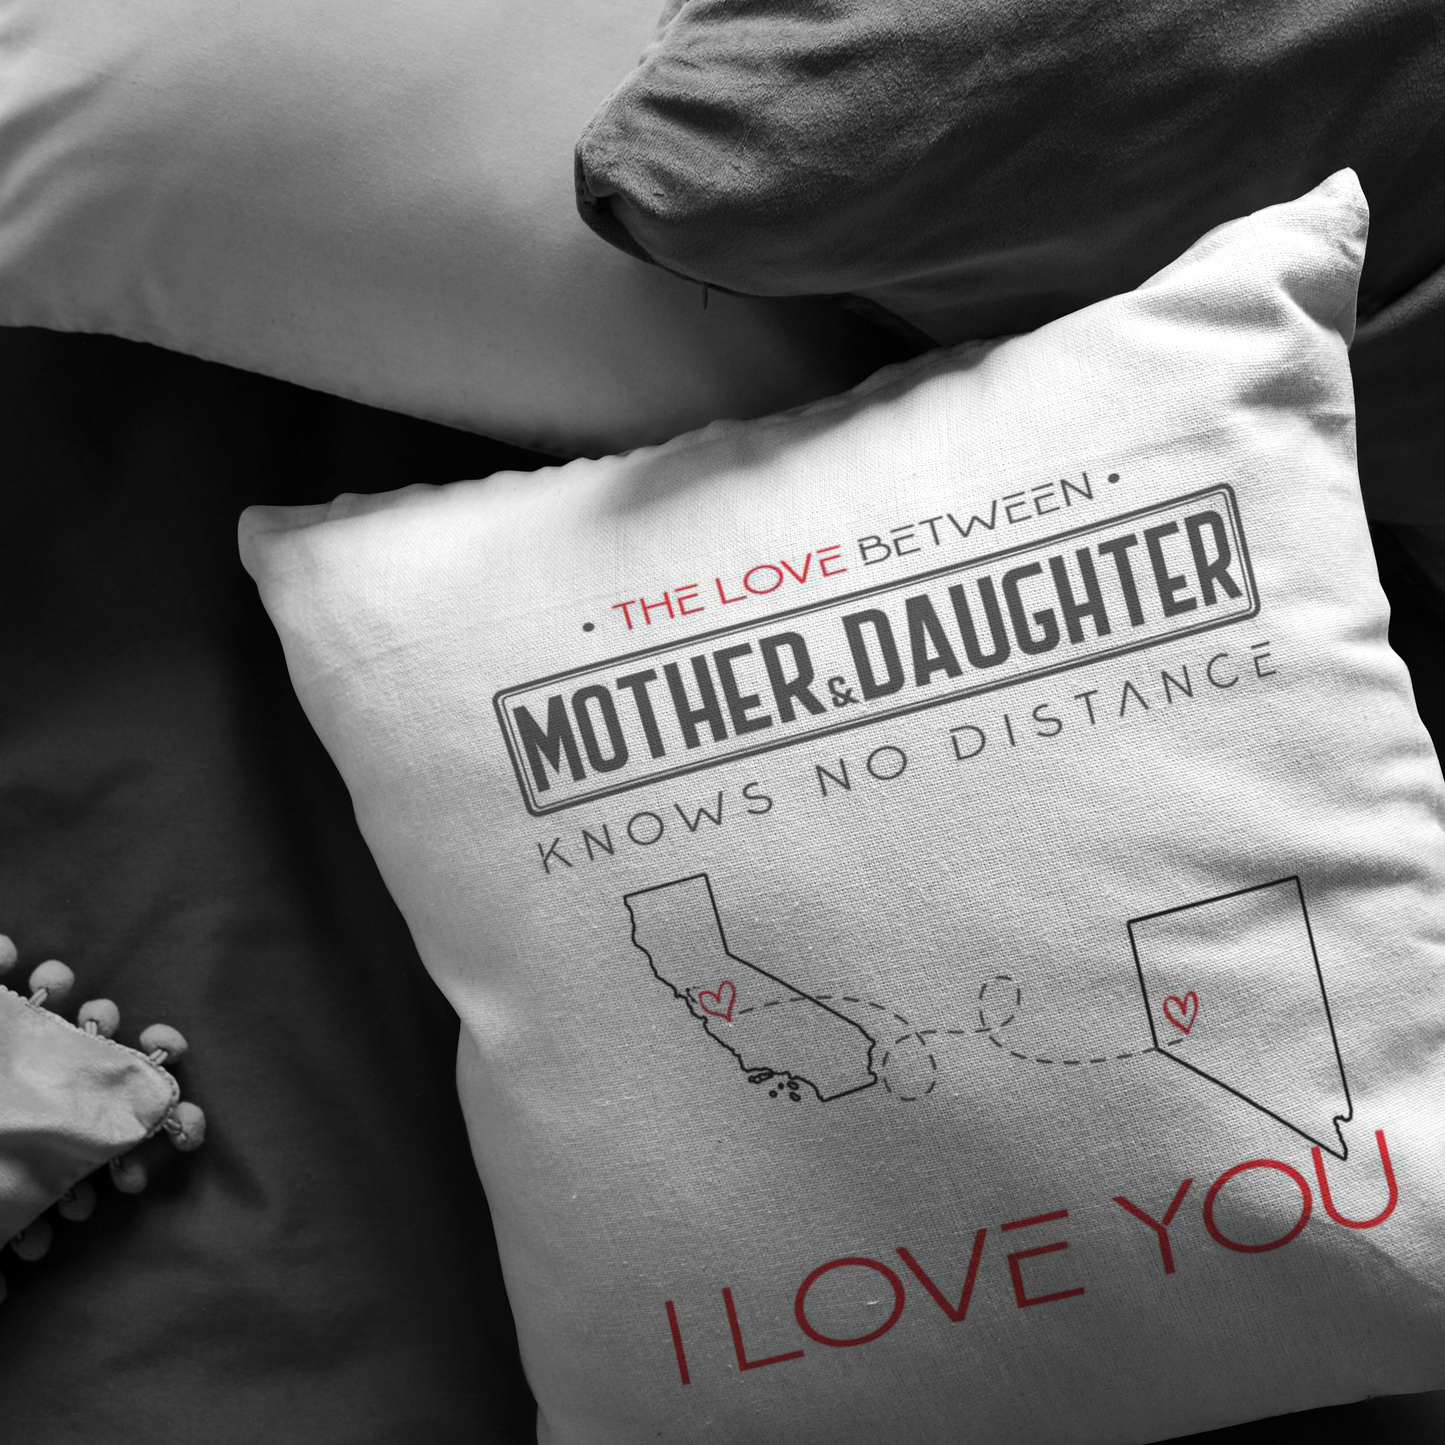 ND-pl20419438-sp-26956 - [ California | Nevada | Mother And Daughter ] (PI_ThrowPillowCovers) Happy Farhers Day, Mothers Day Decoration Personalized - The